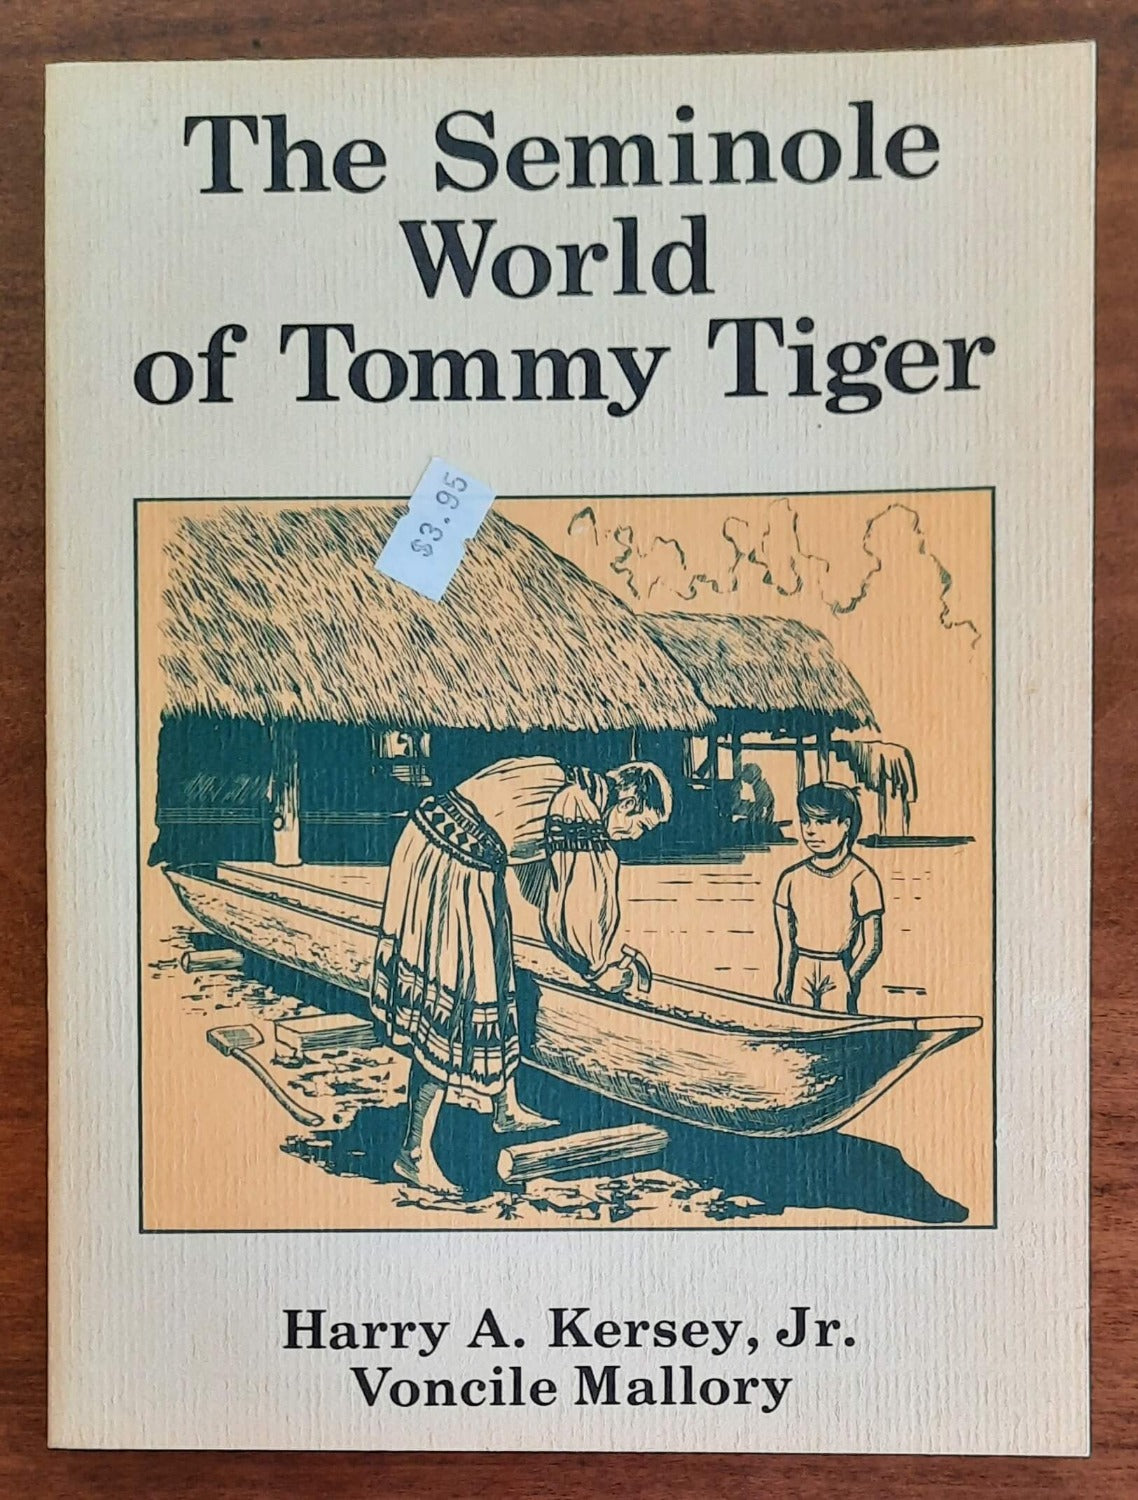 The Seminole World of Tommy Tiger